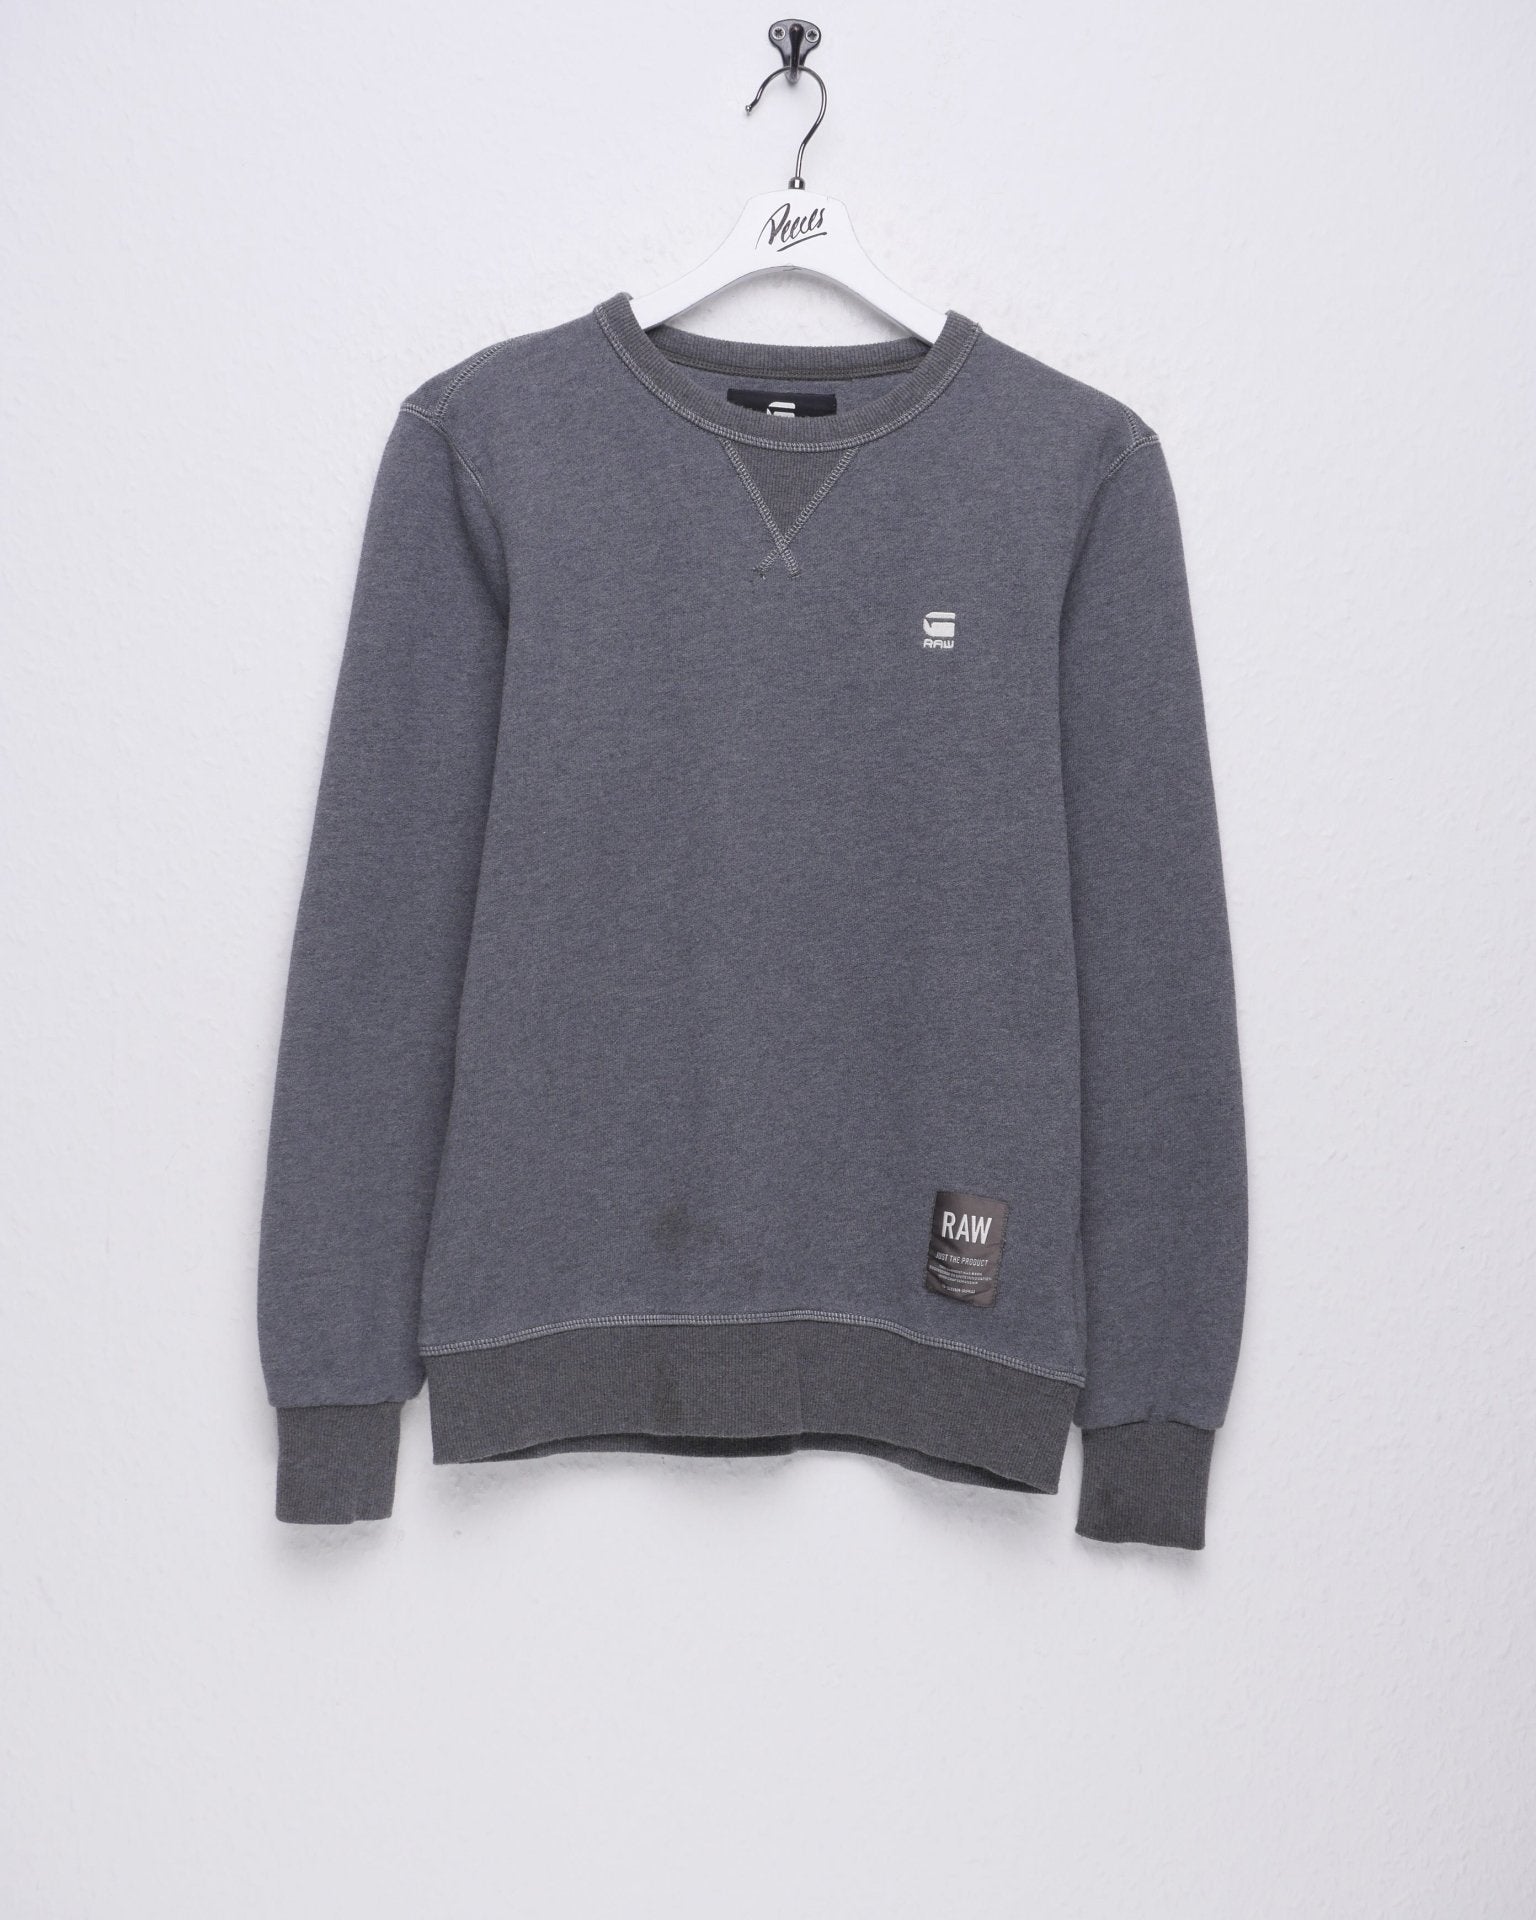 G-Star Raw embroidered Logo Vintage Sweater - Peeces